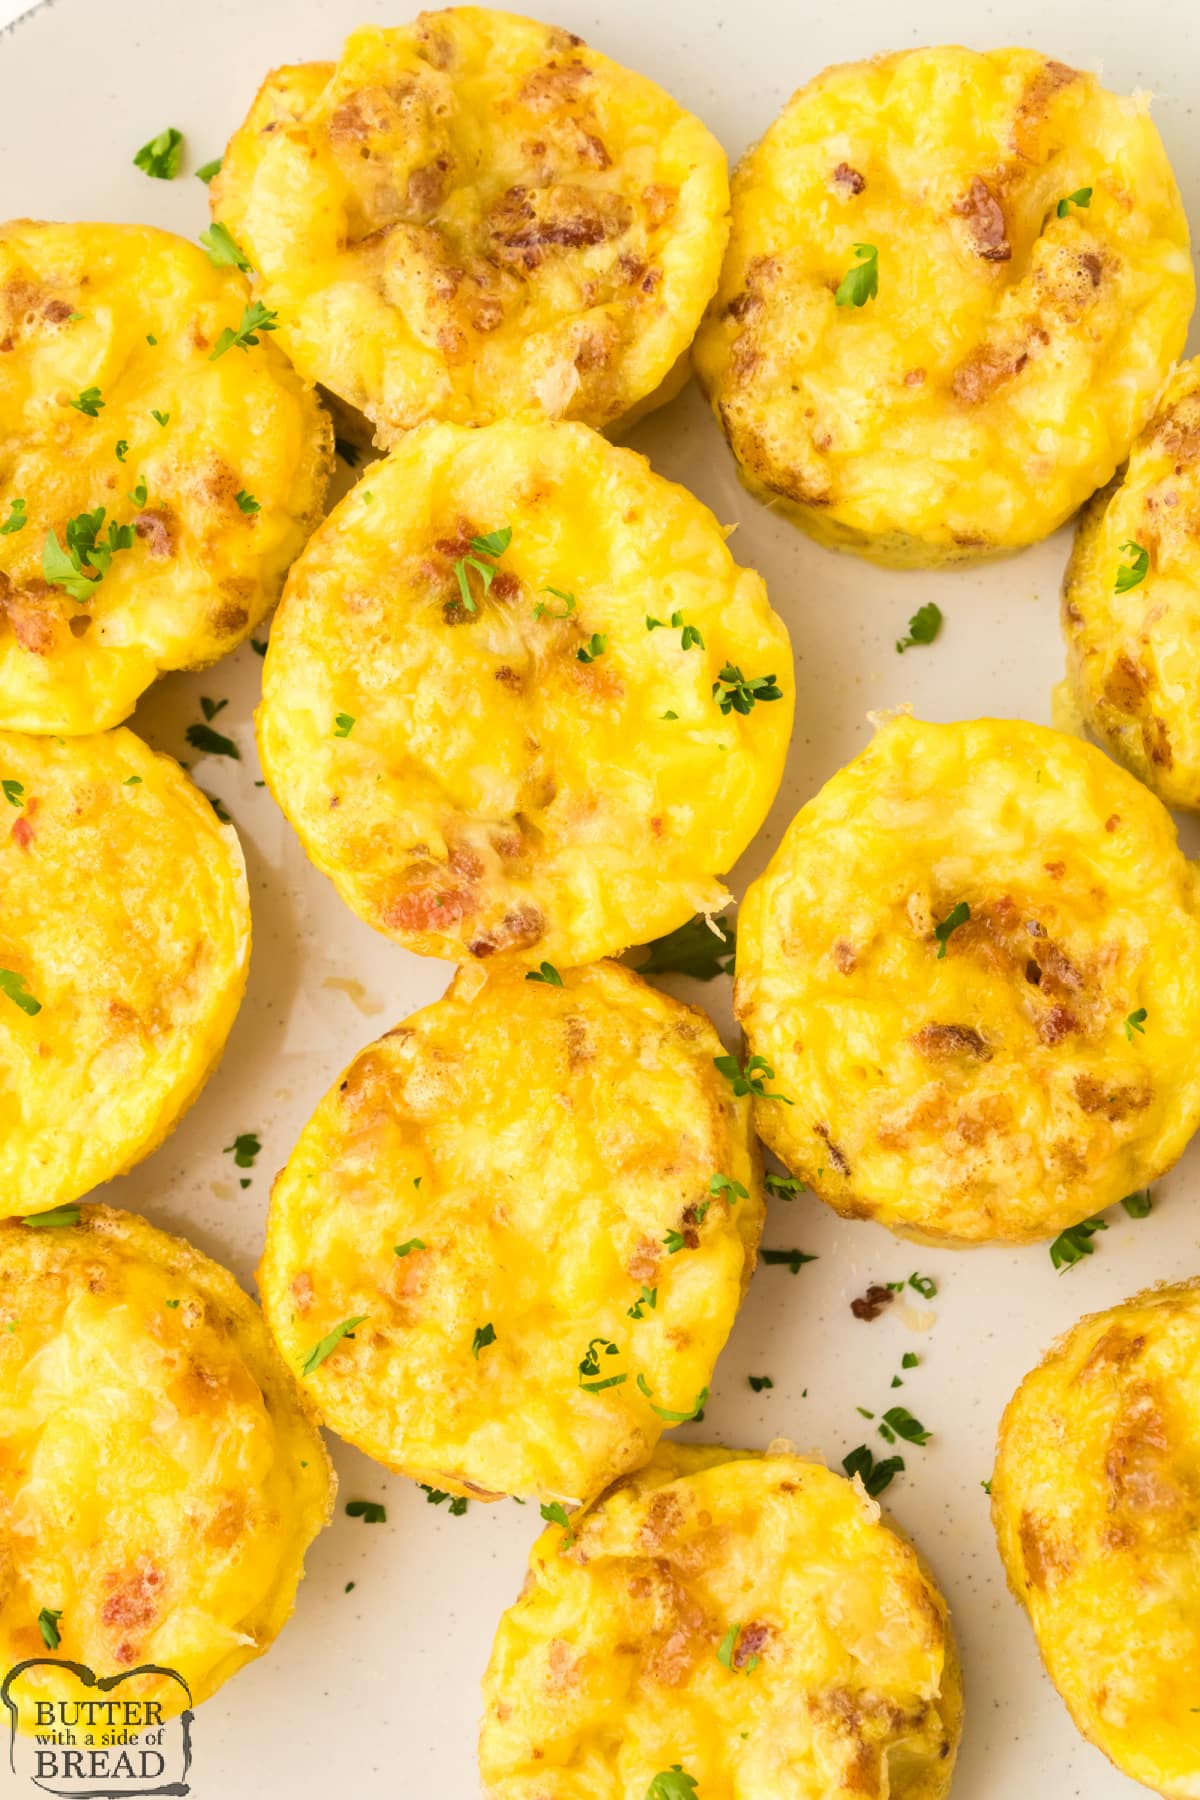 Easy Egg Muffins are perfect for a gluten-free, low carb snack or breakfast. This egg bites recipe is simple to make and they are so easy to prep in advance. 